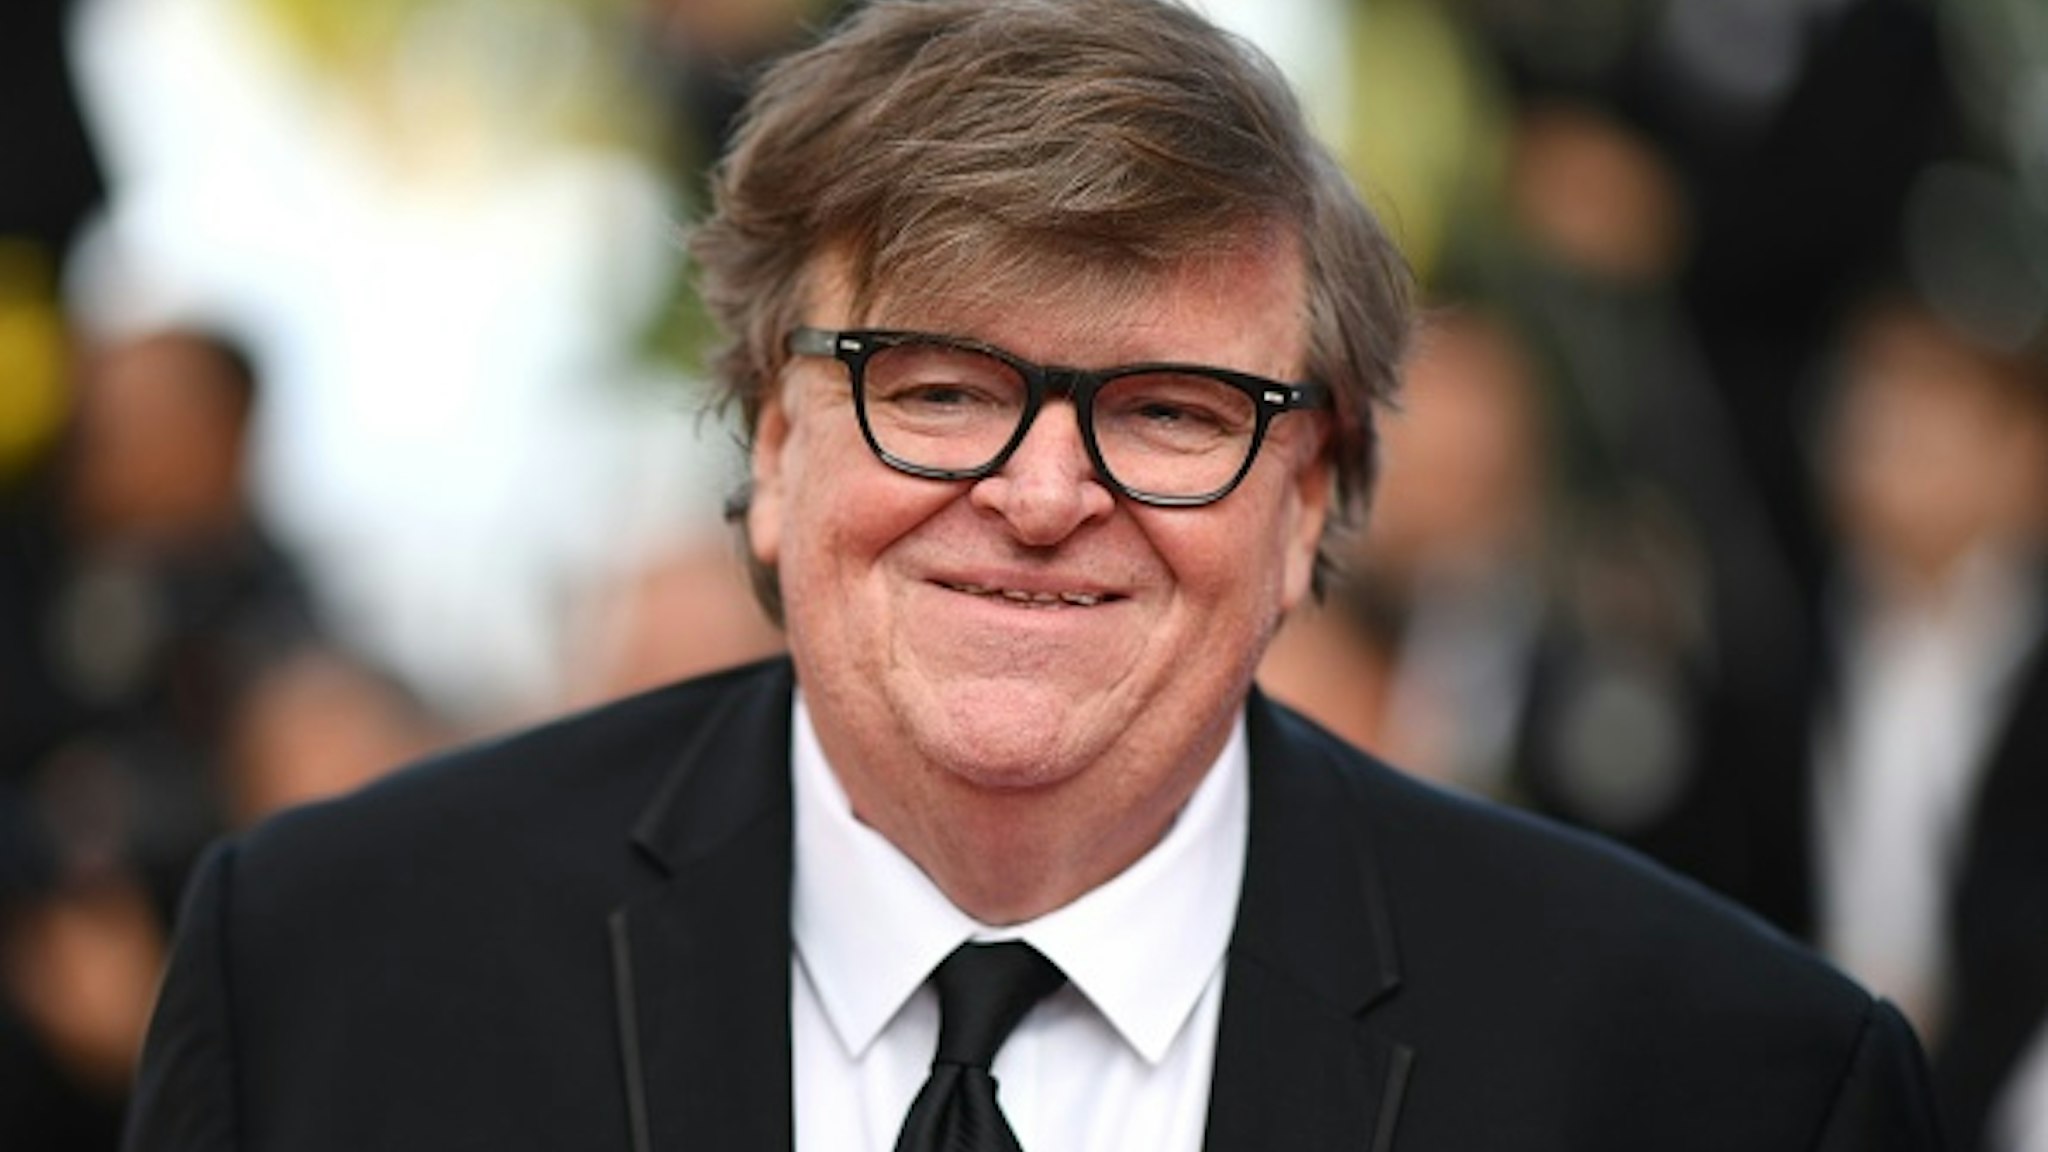 US filmmaker Michael Moore arrives for the screening of the film "The Specials (Hors Normes)" at the 72nd edition of the Cannes Film Festival in Cannes, southern France, on May 25, 2019.